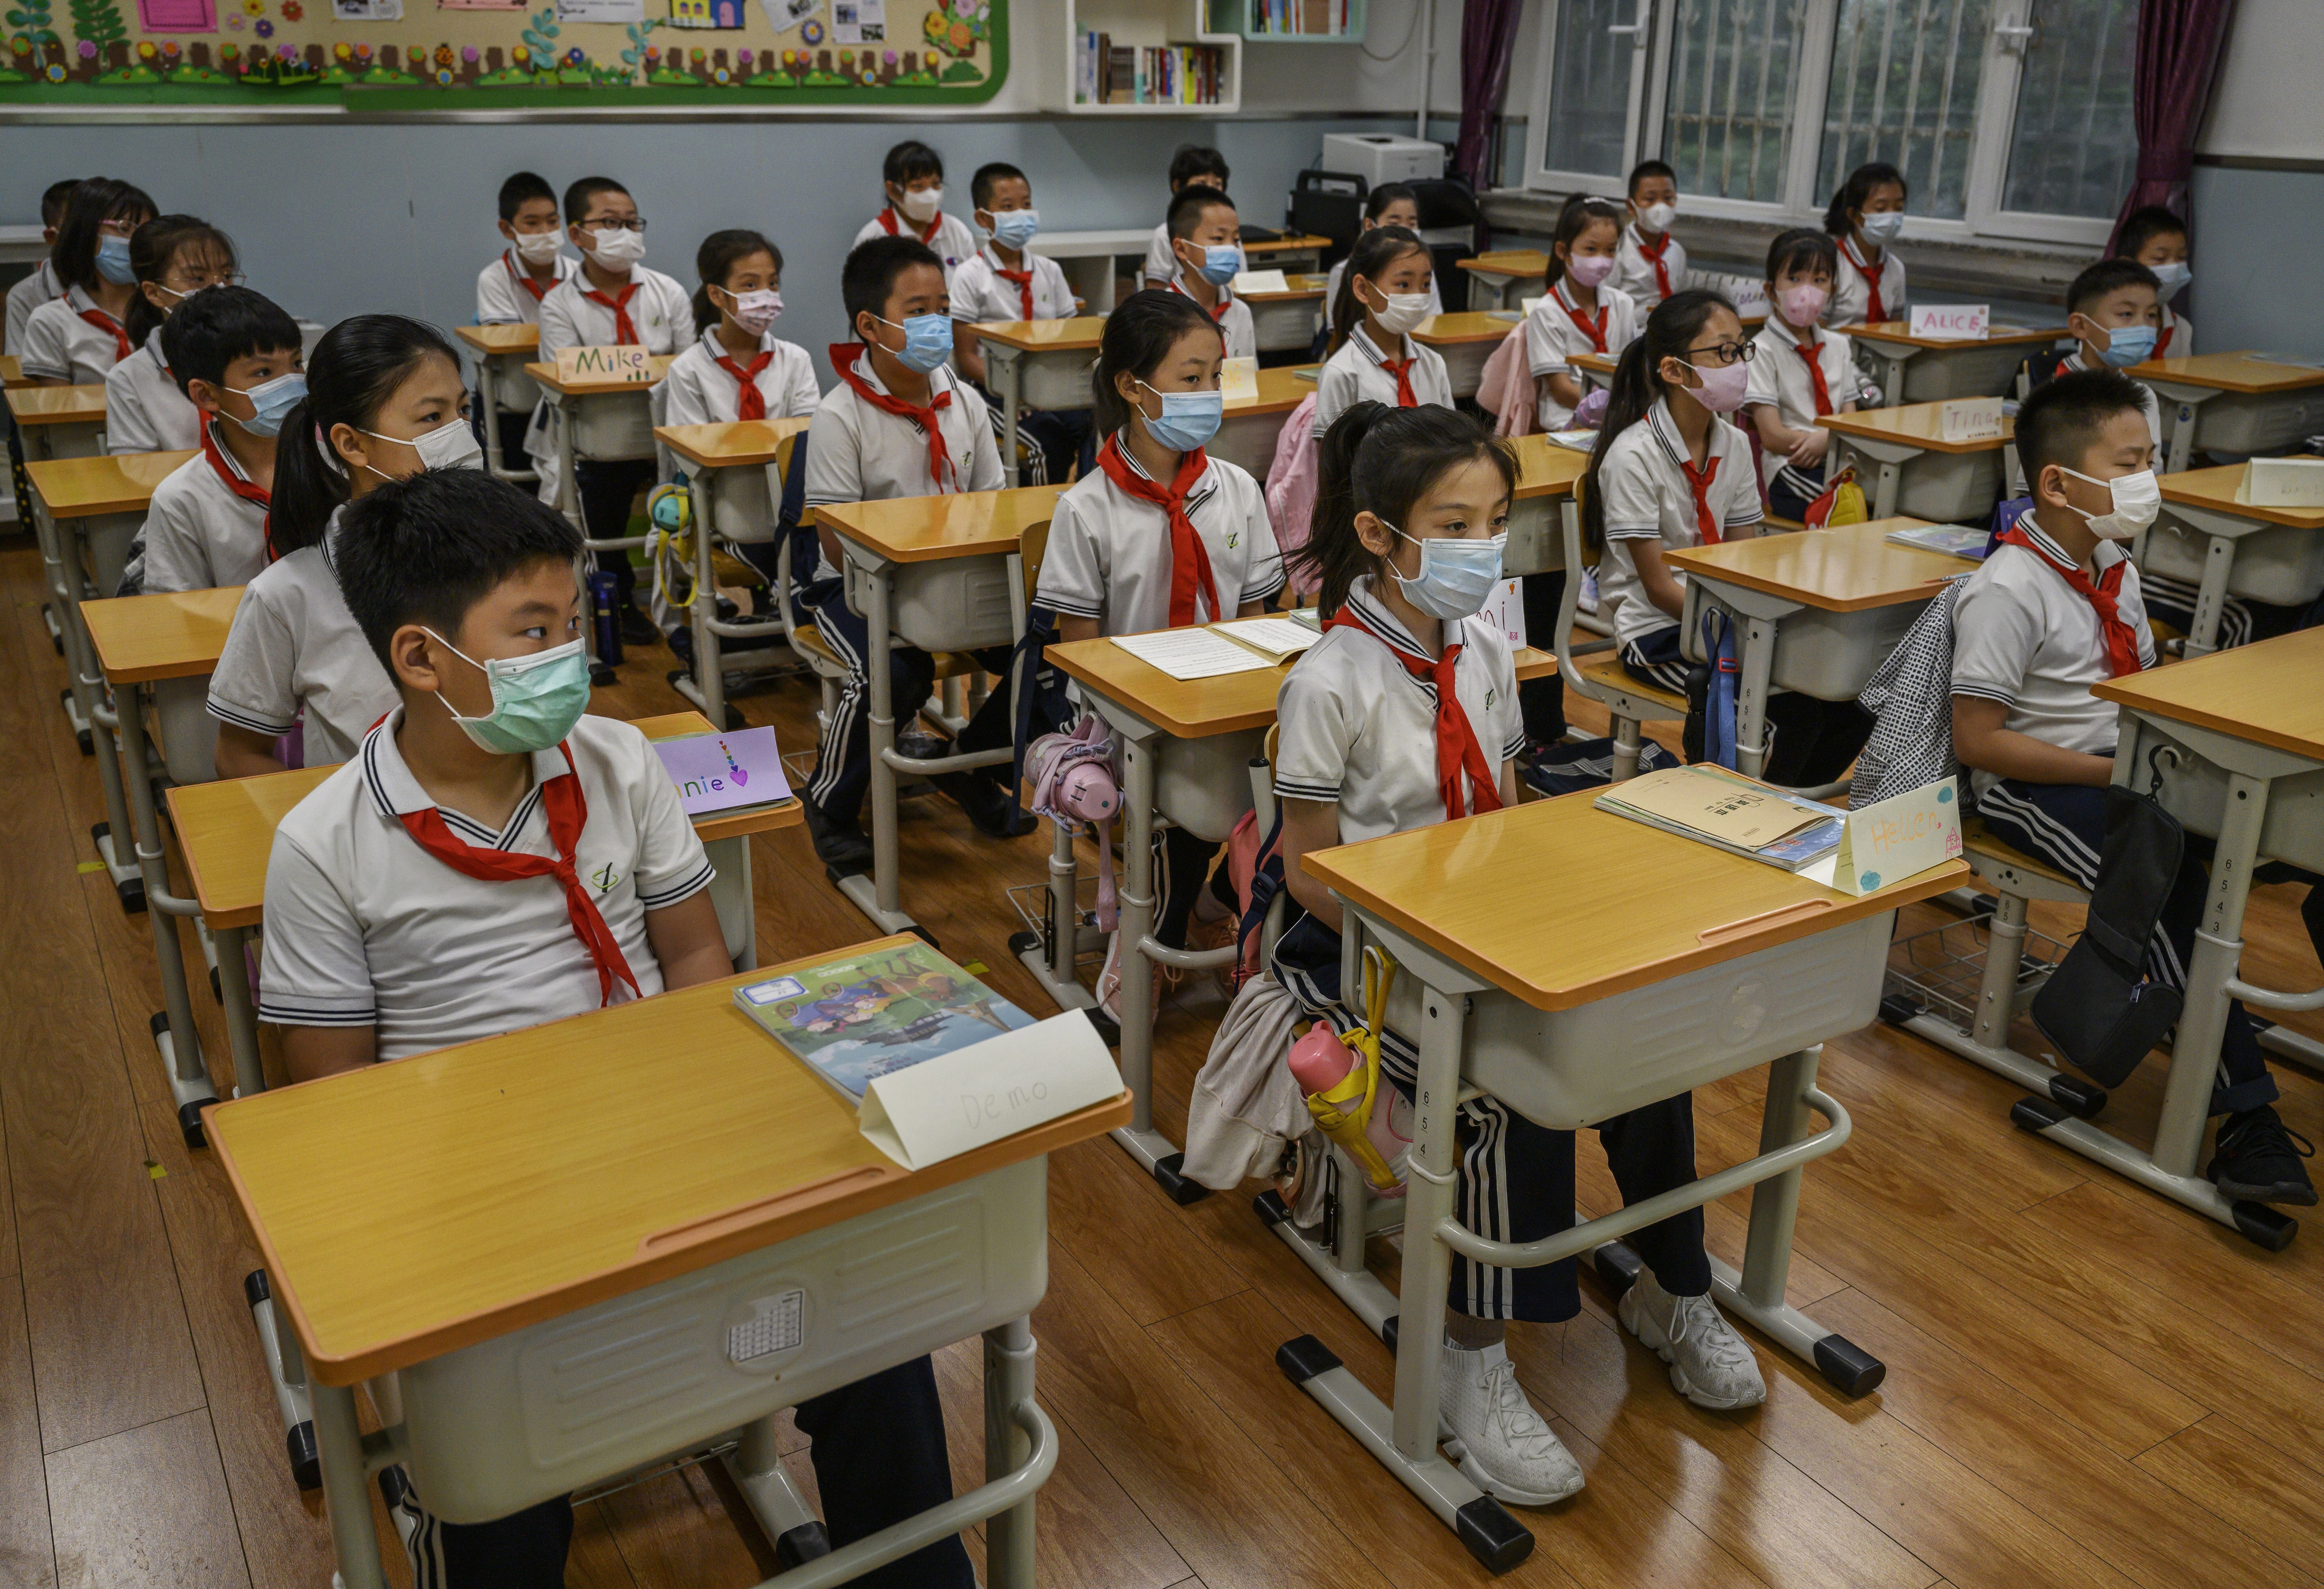 Deep-seated values could stand in the way of developing sex education in China. Photo: Getty Images